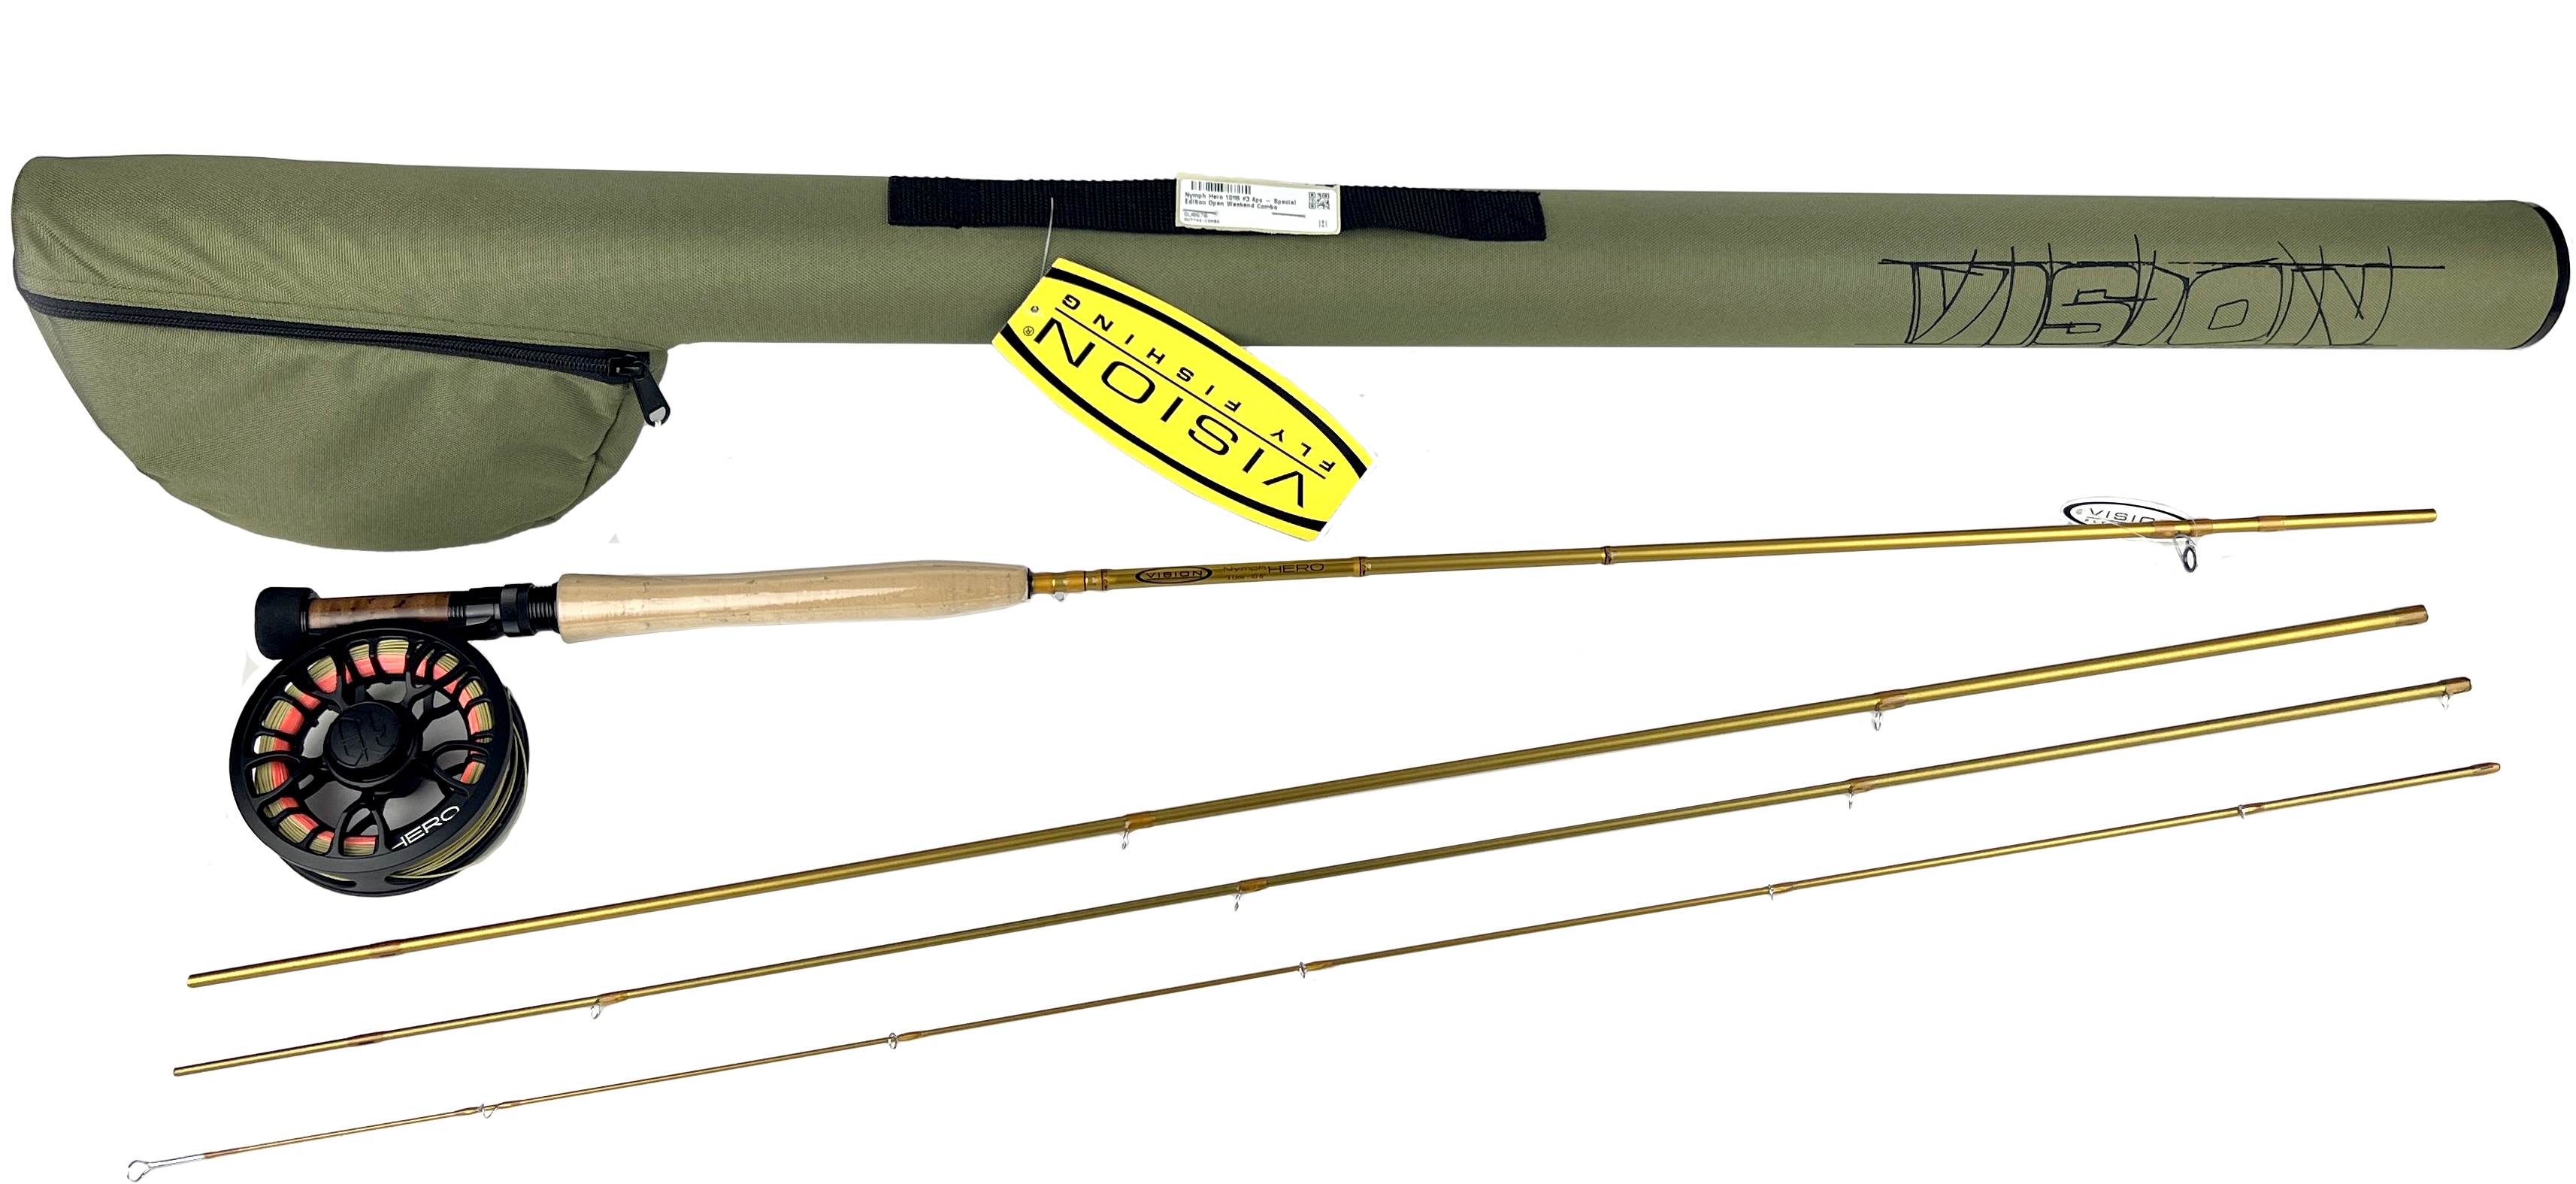 https://cdn.fishingmegastore.com/hires/vision/nymph-hero-10ft6-3-4pc-special-edition-open-weekend-combo.jpg